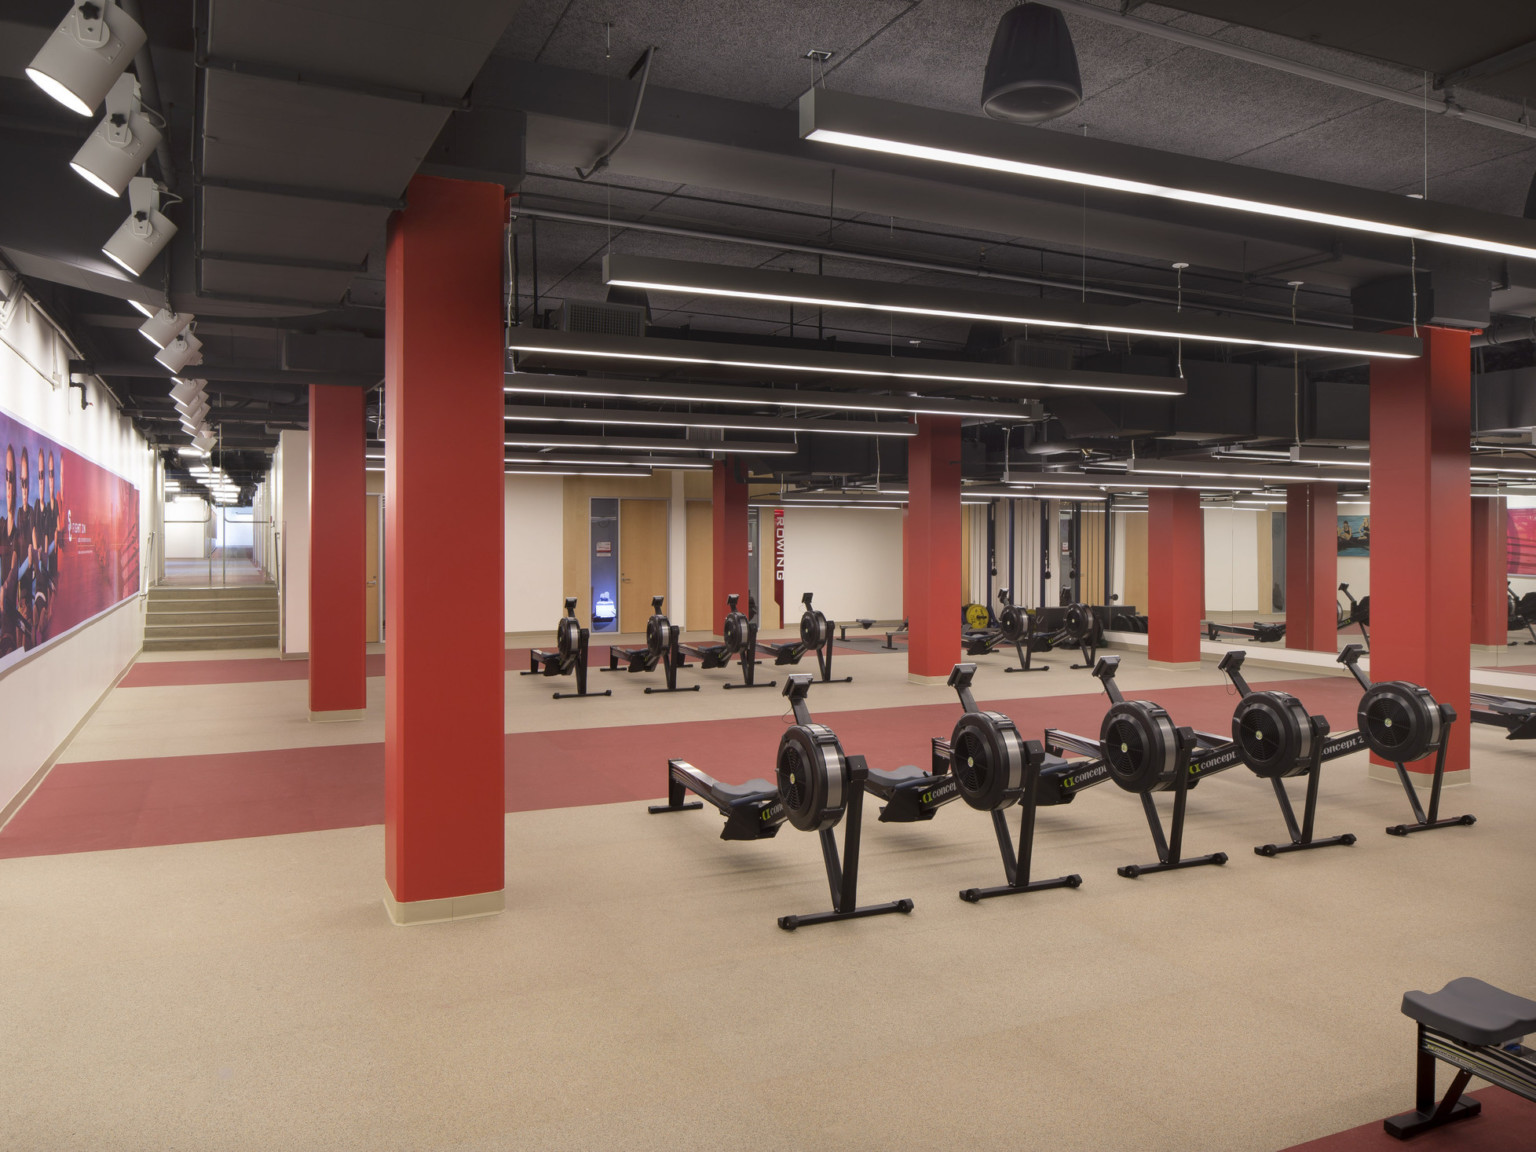 Training room with lines of rowing machines. White walls in room with orange columns to black ceiling with exposed ductwork